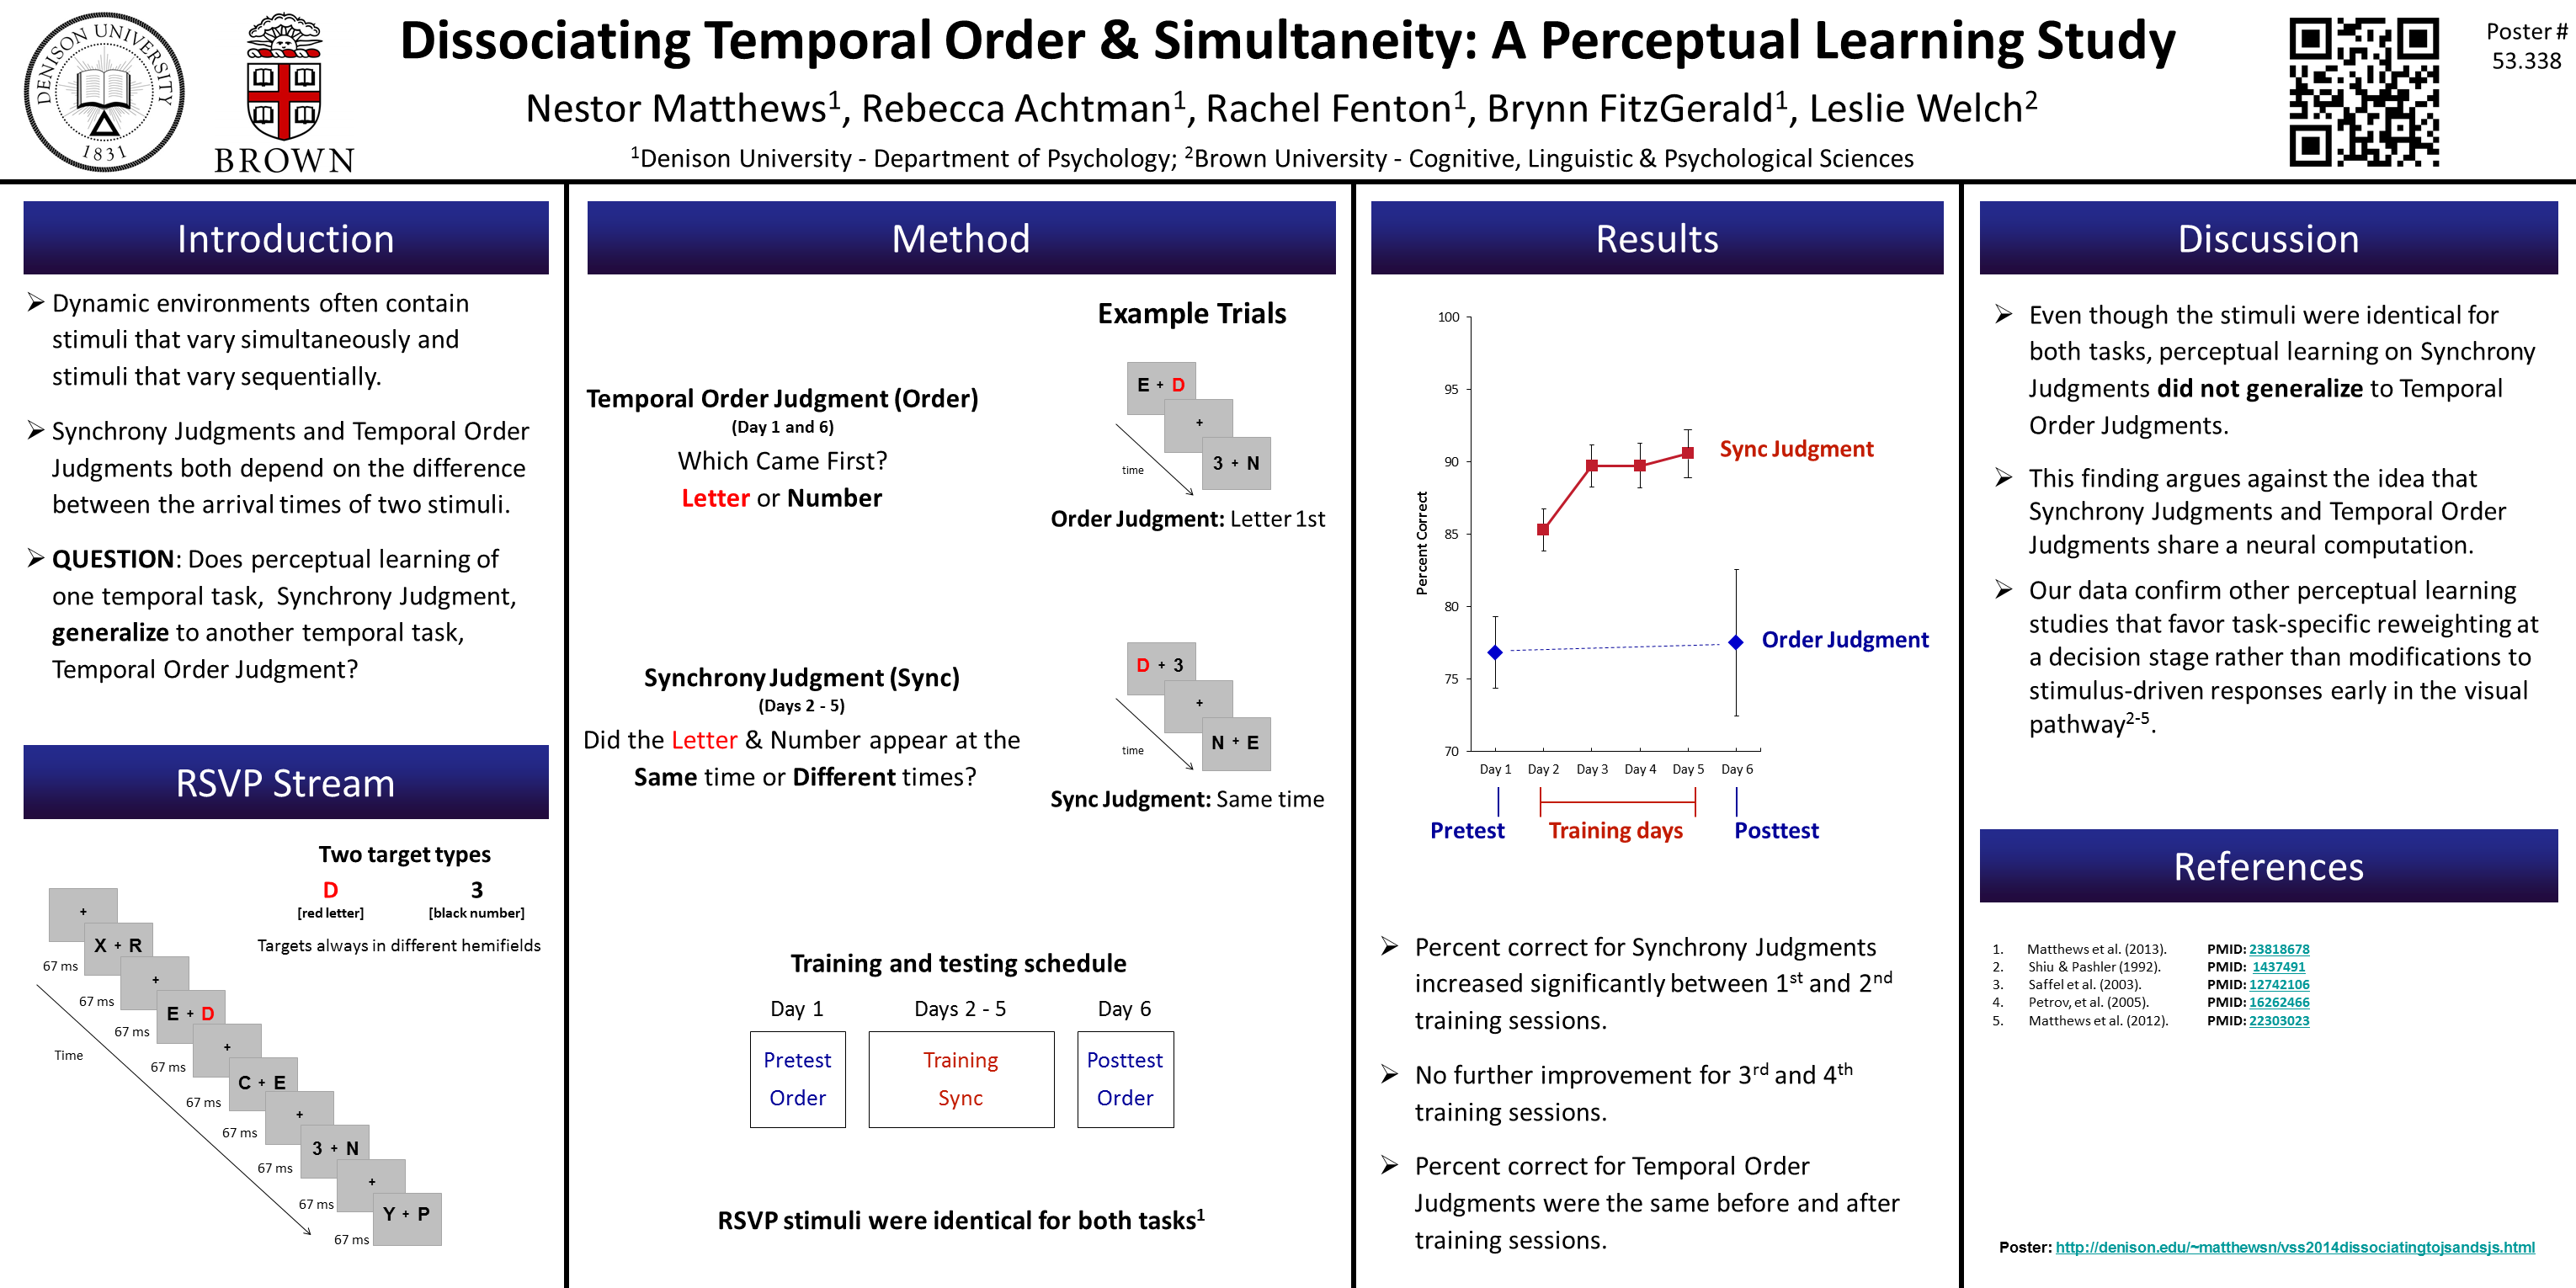 Dissociating Temporal Order & Simultaneity: A Perceptual Learning Study